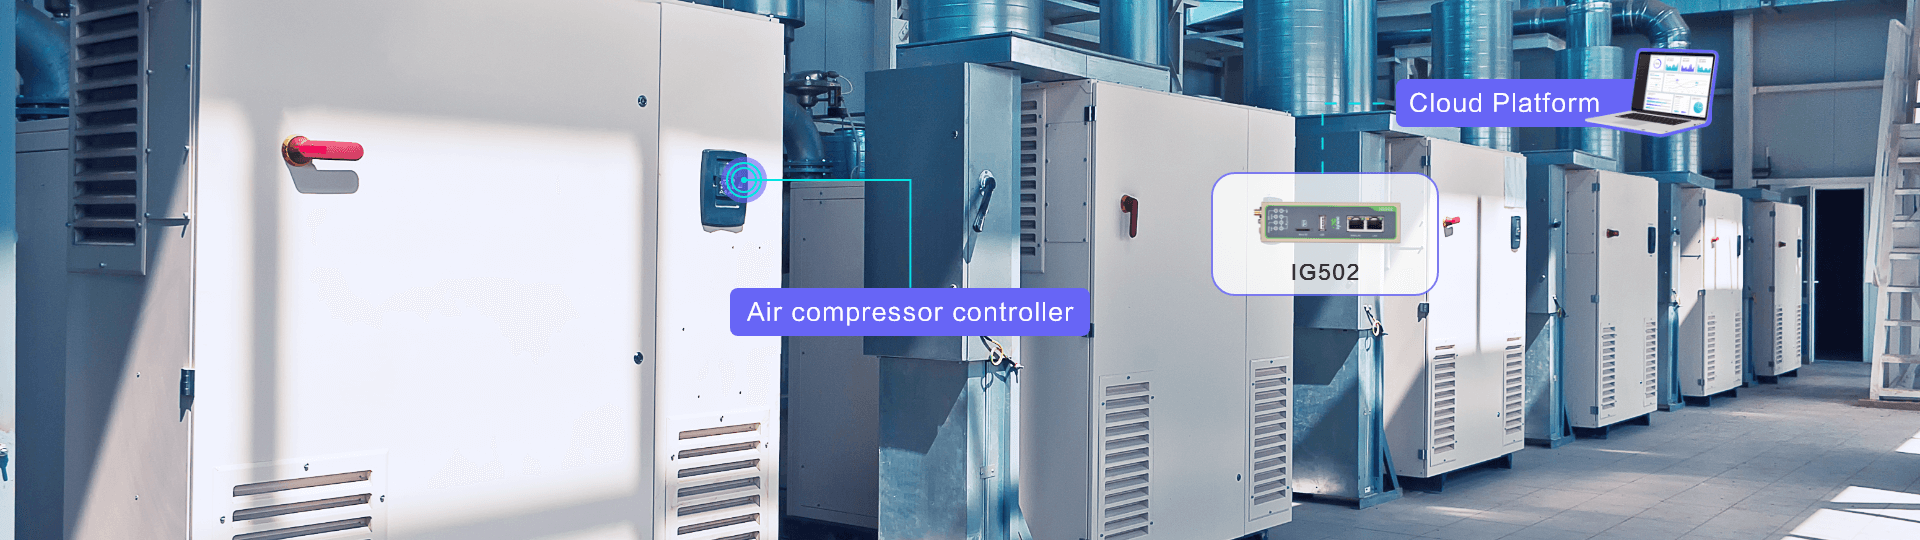 Remote Monitoring and Maintenance for Intelligent Air Compressors